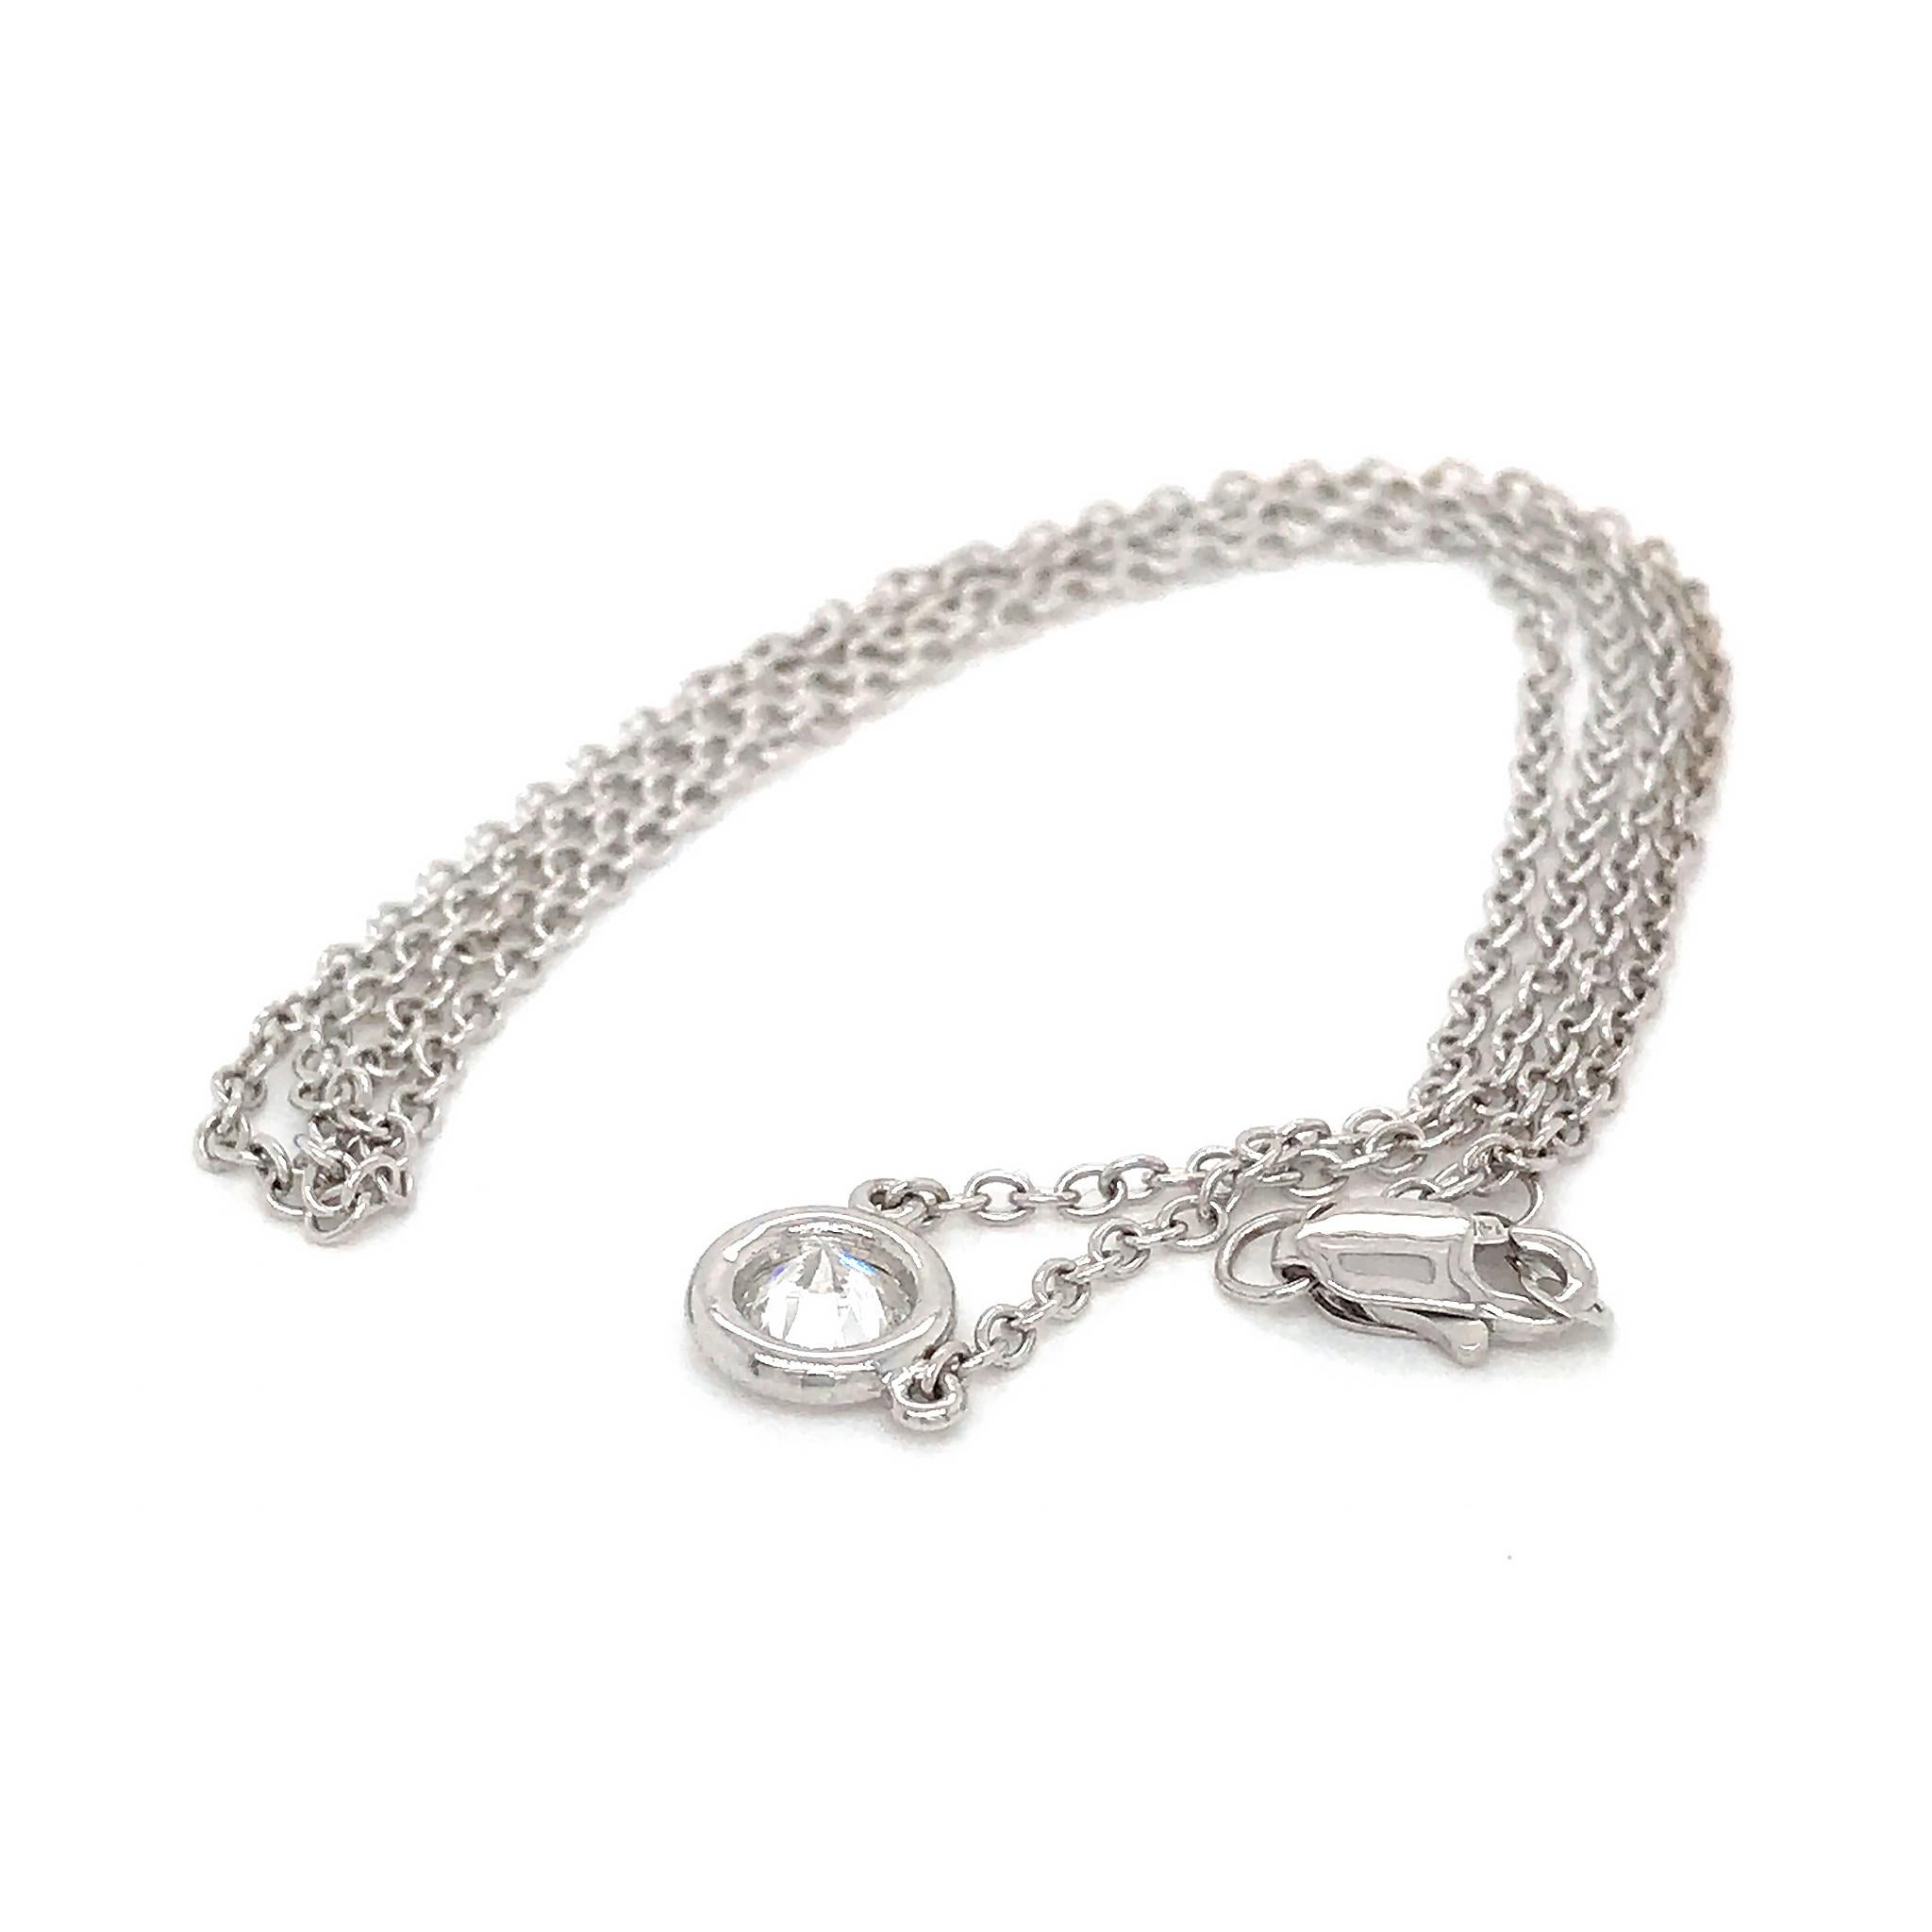 14k White Gold
Diamond: 0.60ct twd (estimated)
Total Weight: 2.8 grams
Chain Length: 18 inches